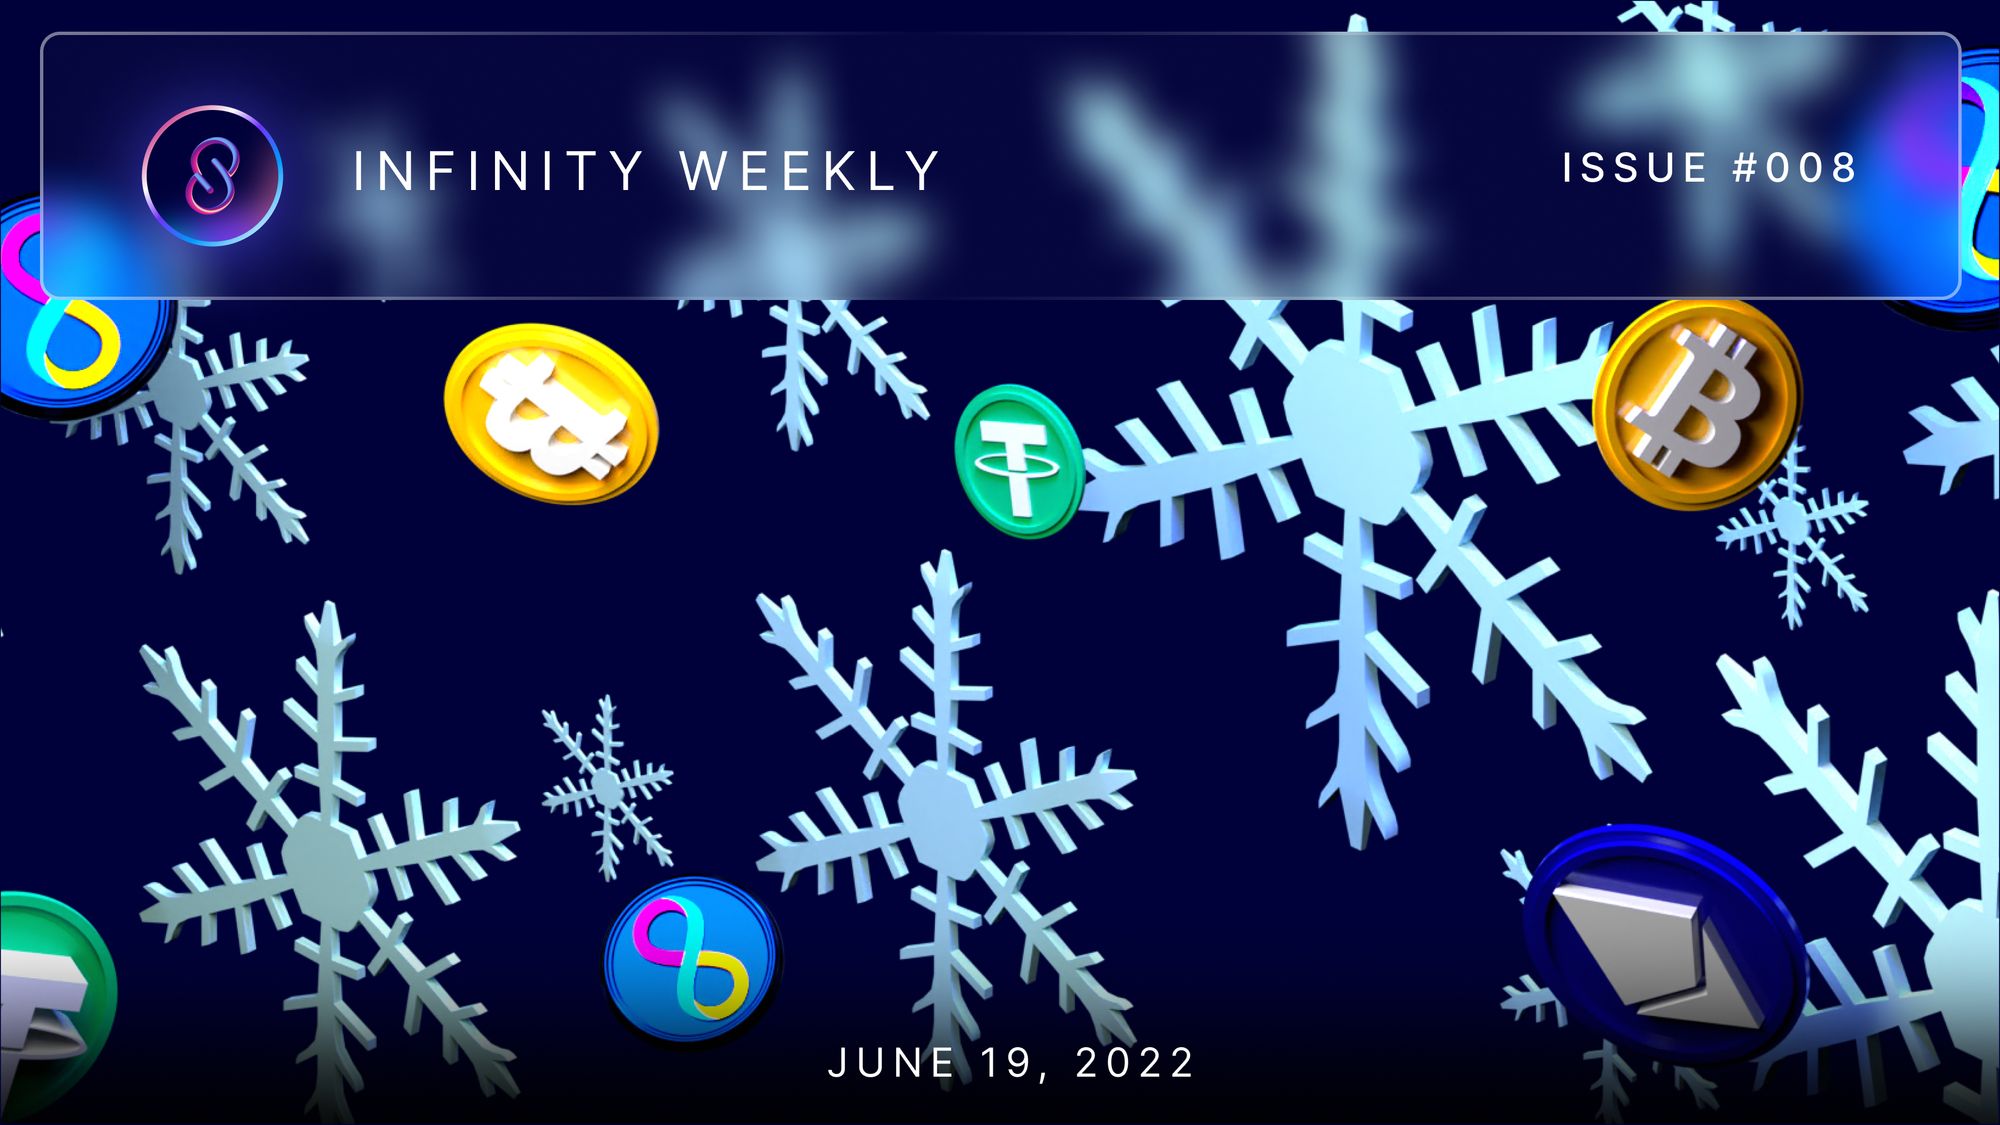 Infinity Weekly: For Some Actions, There's an Overreaction